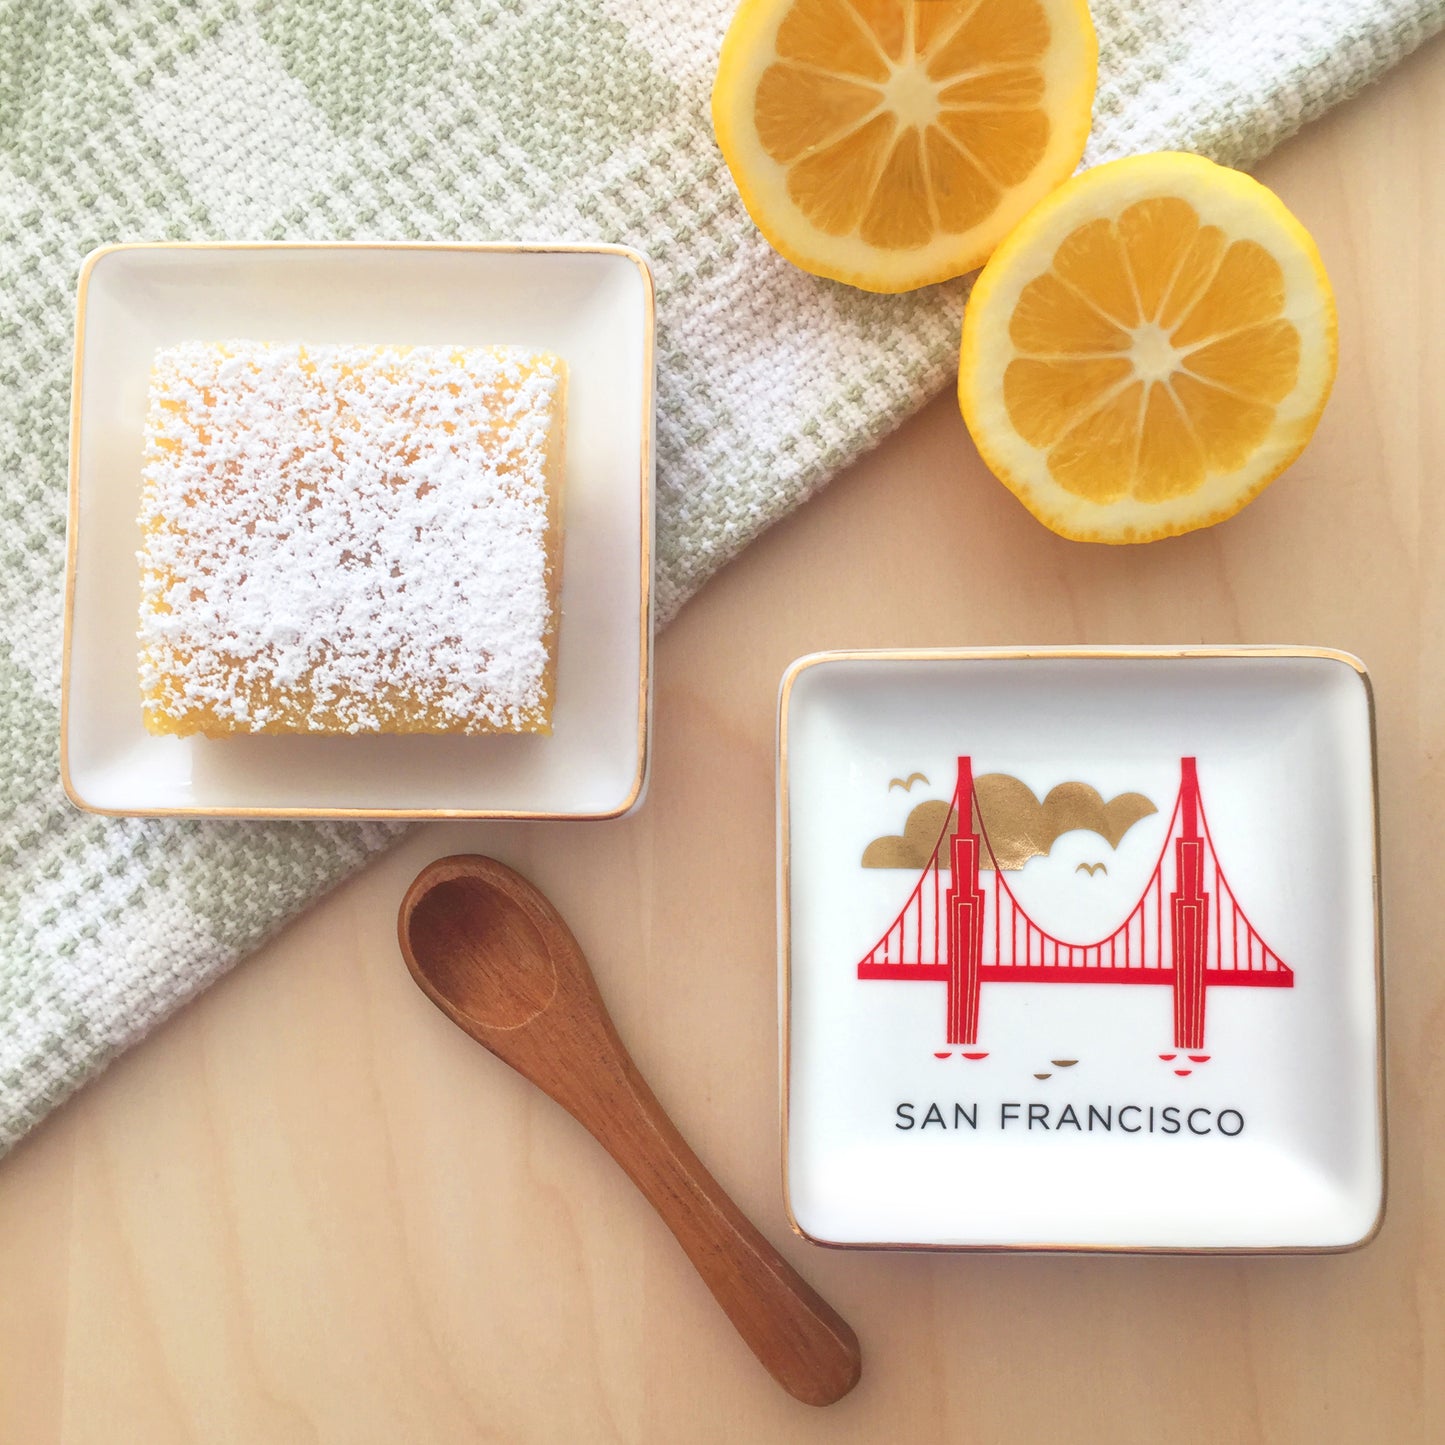 A lemon bar cookie, cut lemons, wooden spoon, tea towel, and small square ceramic dish featuring a colorful illustration of San Francisco’s Golden Gate Bridge with gold accents sit on a wooden table top.